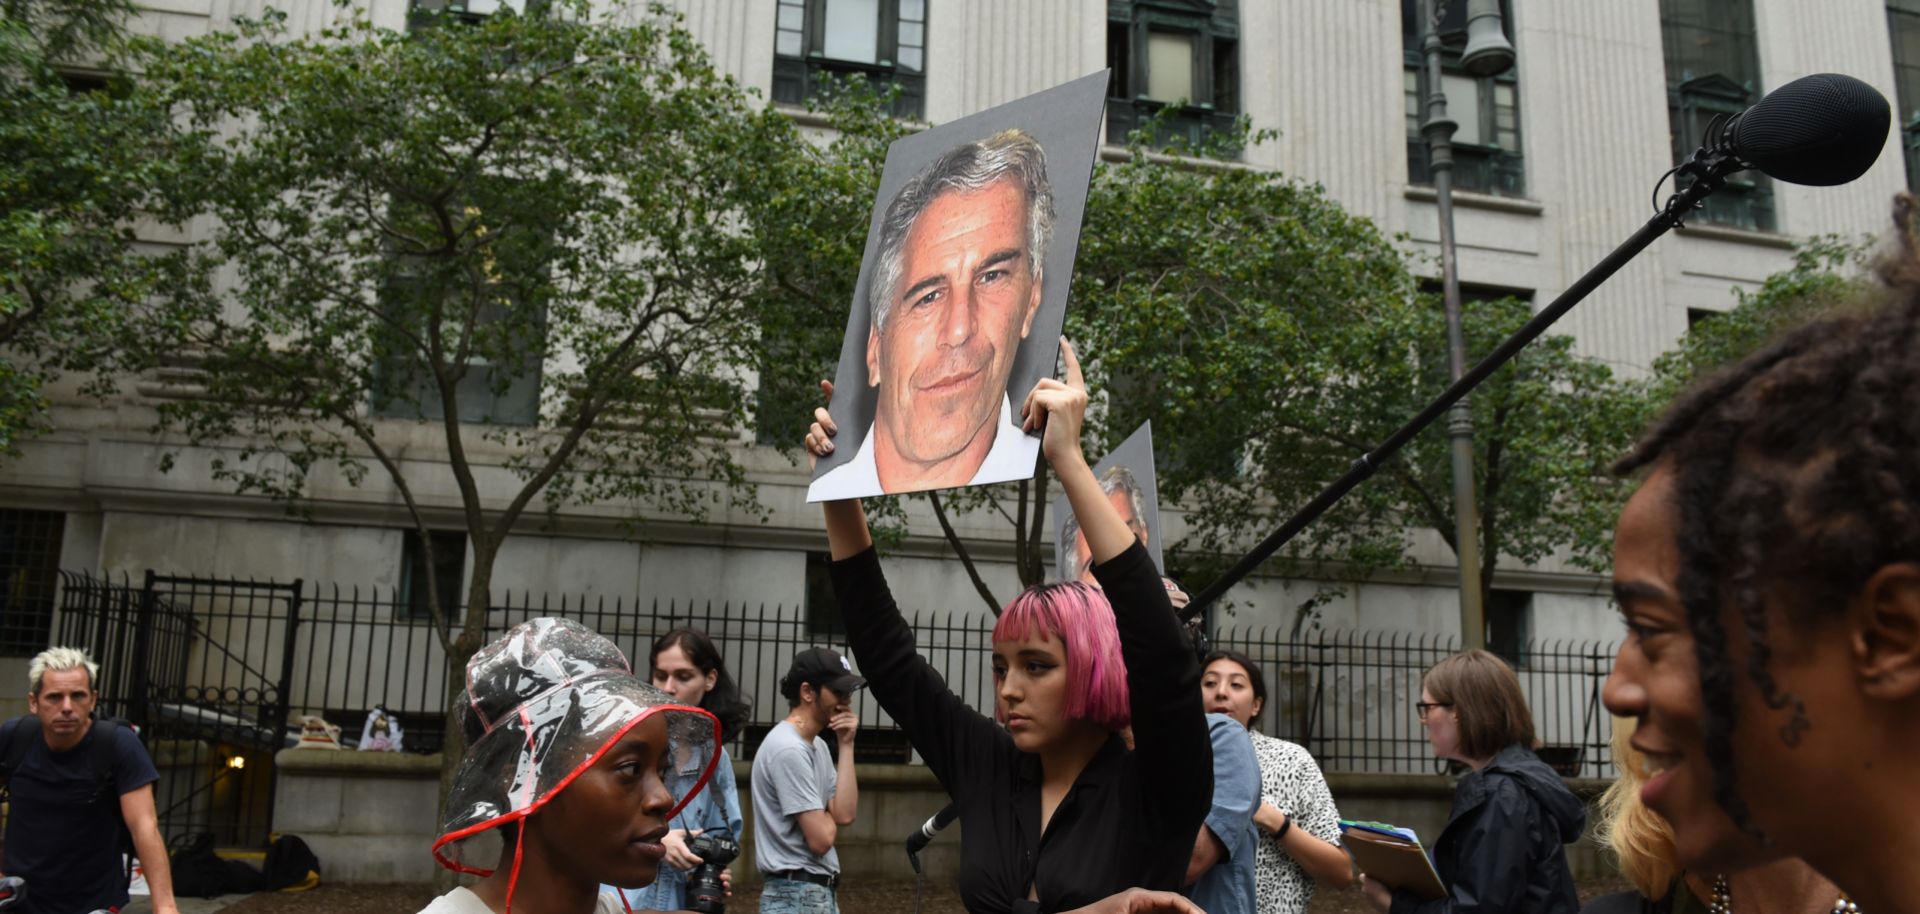 A protest group called Hot Mess holds up signs of Jeffrey Epstein at the federal courthouse in New York City on July 8, 2019.